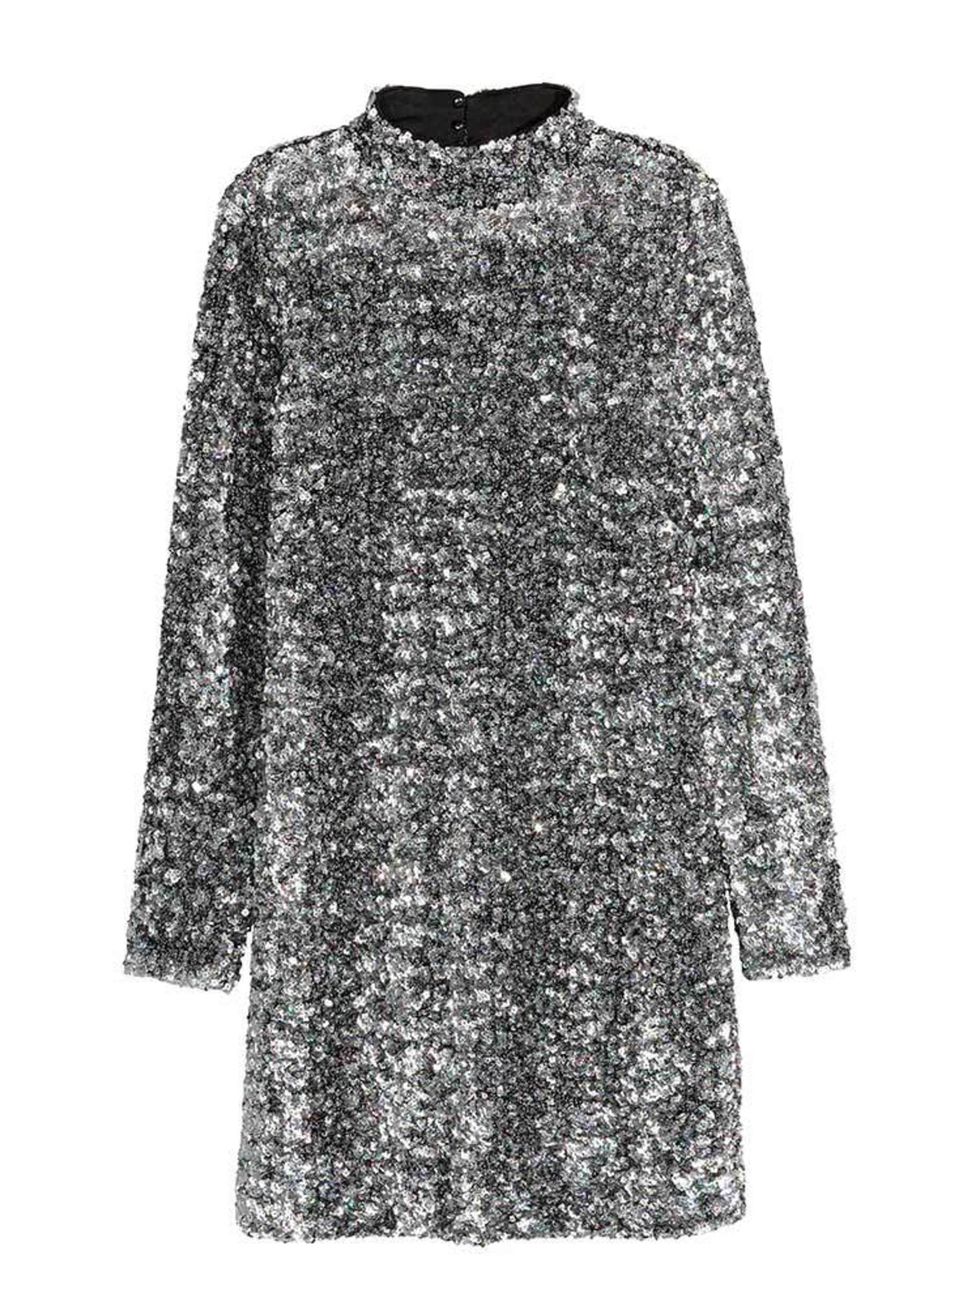 <p>Toughen up a sequin dress with black tights and flat black Chelsea boots. </p>

<p>Dress, £79.99, <a href="http://www2.hm.com/en_gb/productpage.0350232001.html" target="_blank">H&M</a></p>